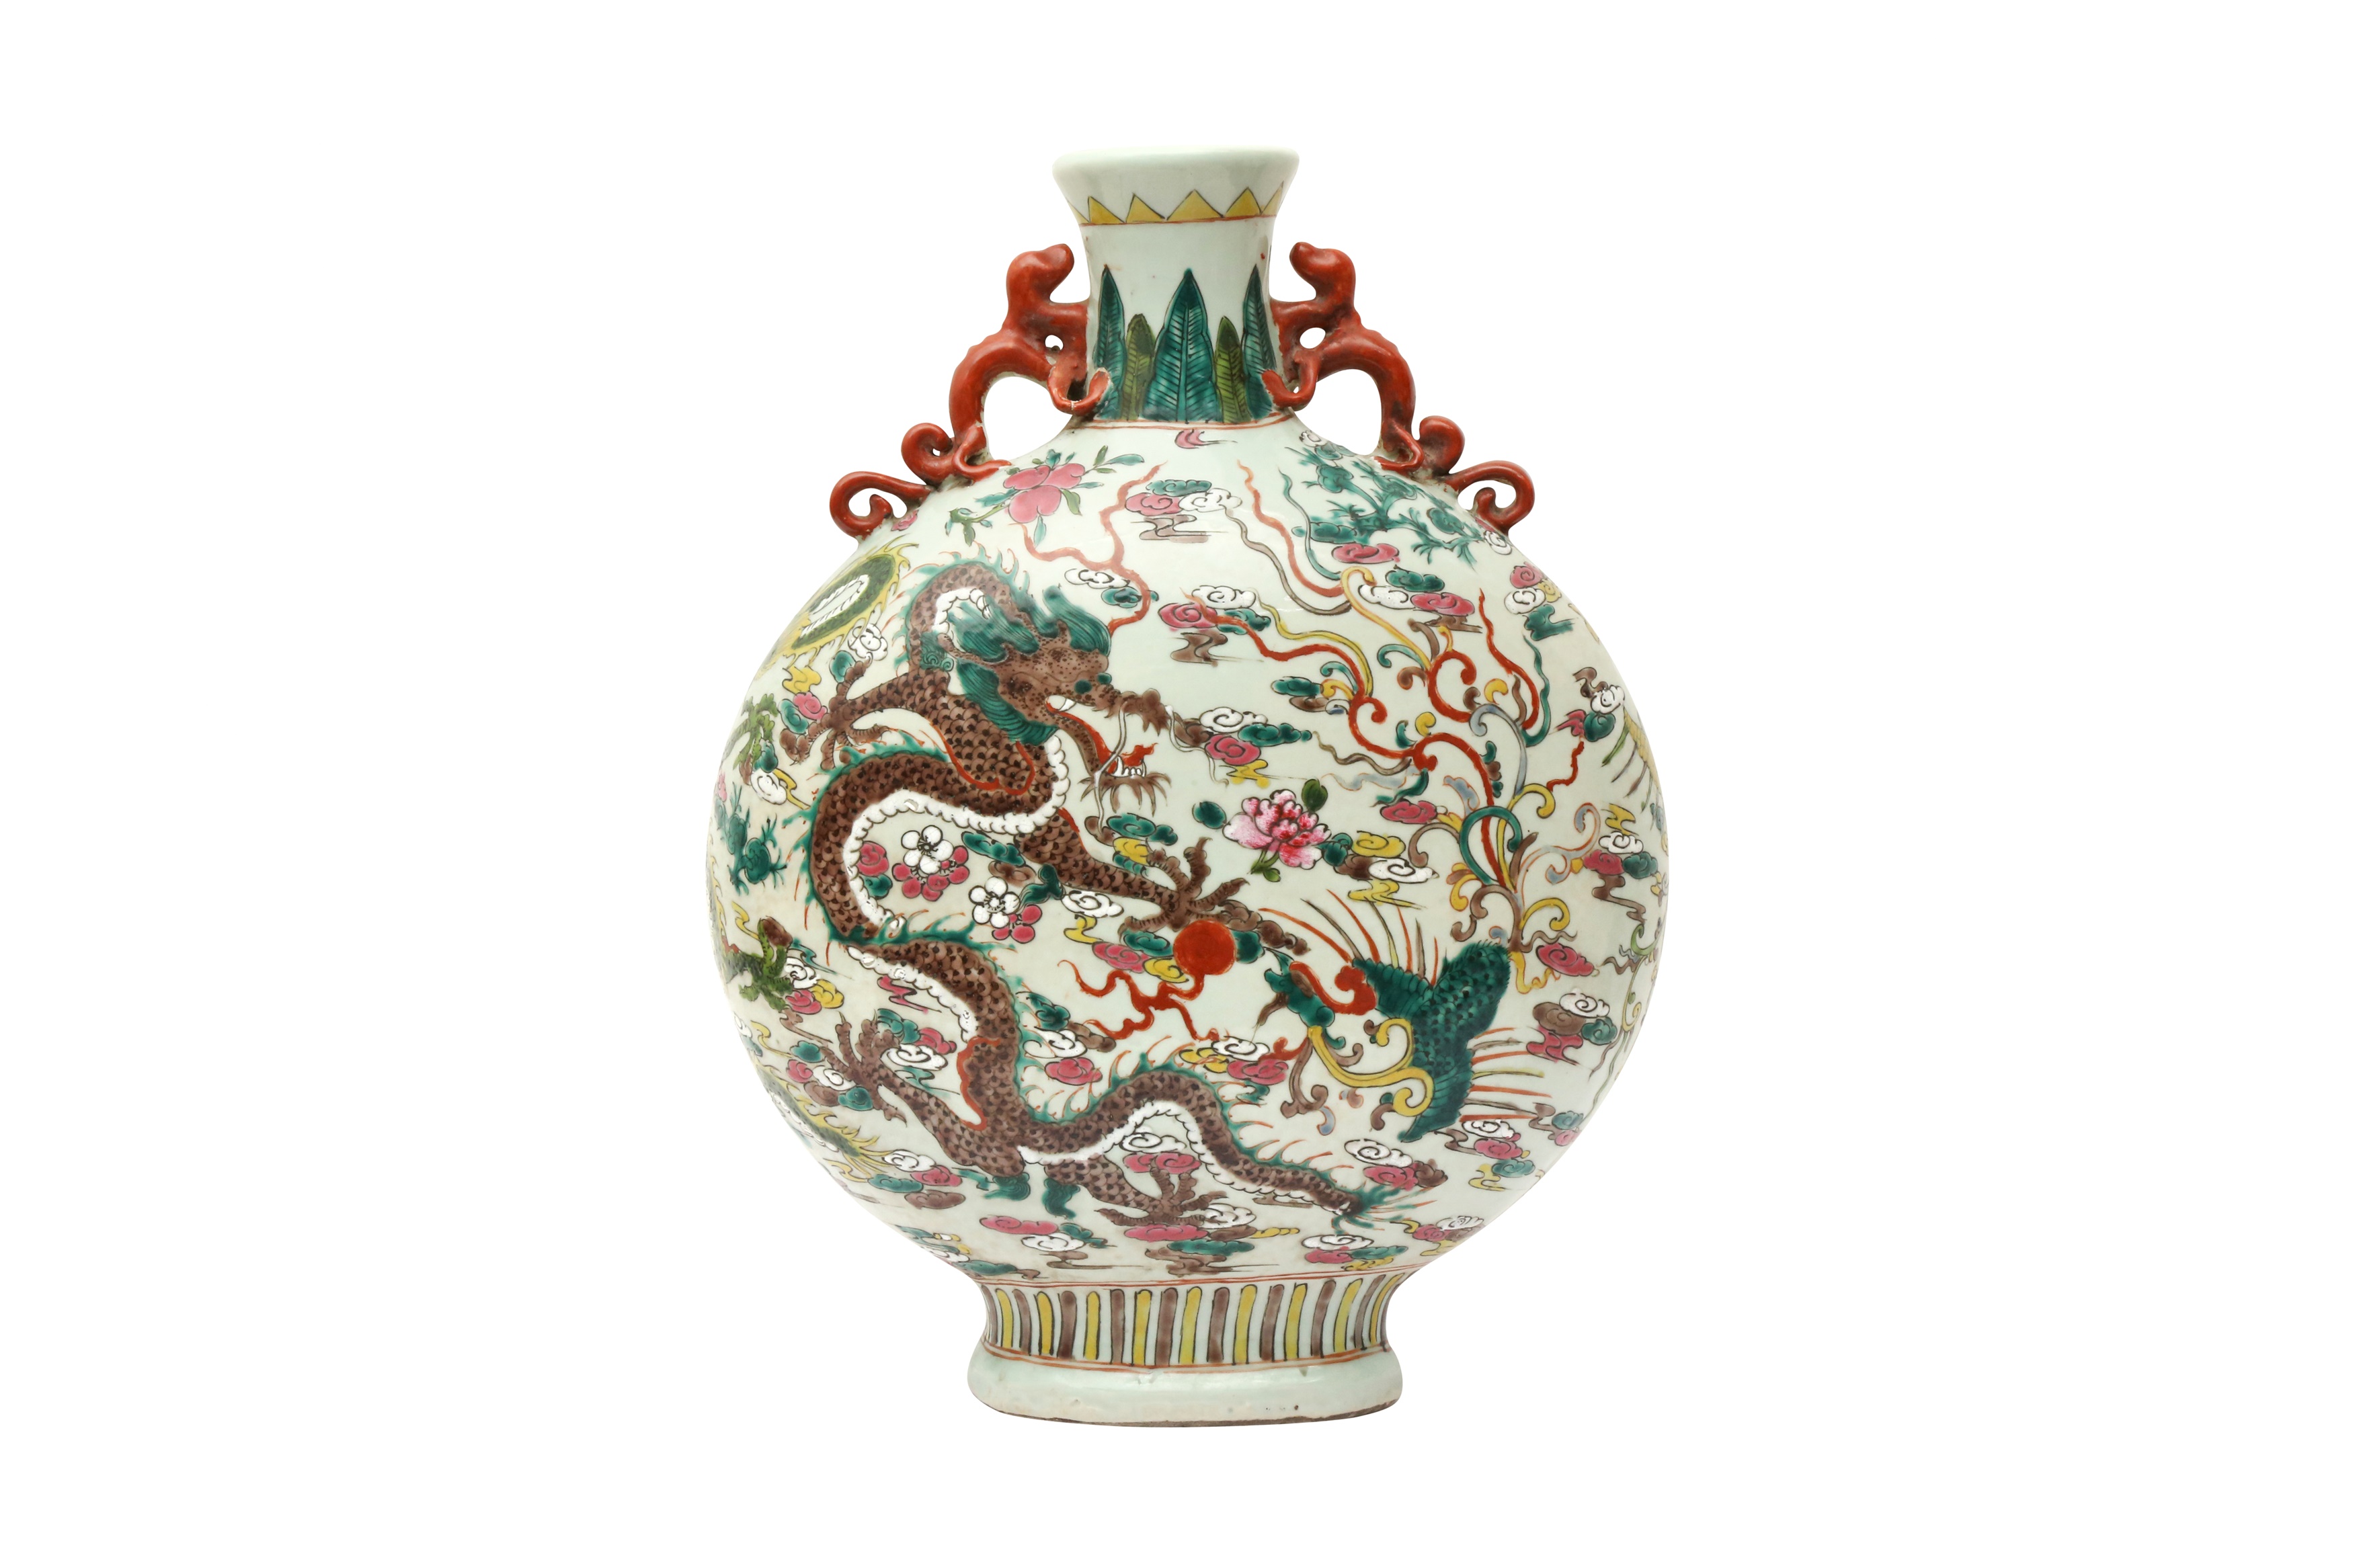 A CHINESE FAMILLE-ROSE 'DRAGON AND PHOENIX' MOONFLASK VASE 二十世紀 粉彩龍鳳呈祥紋抱月瓶 - Image 2 of 9